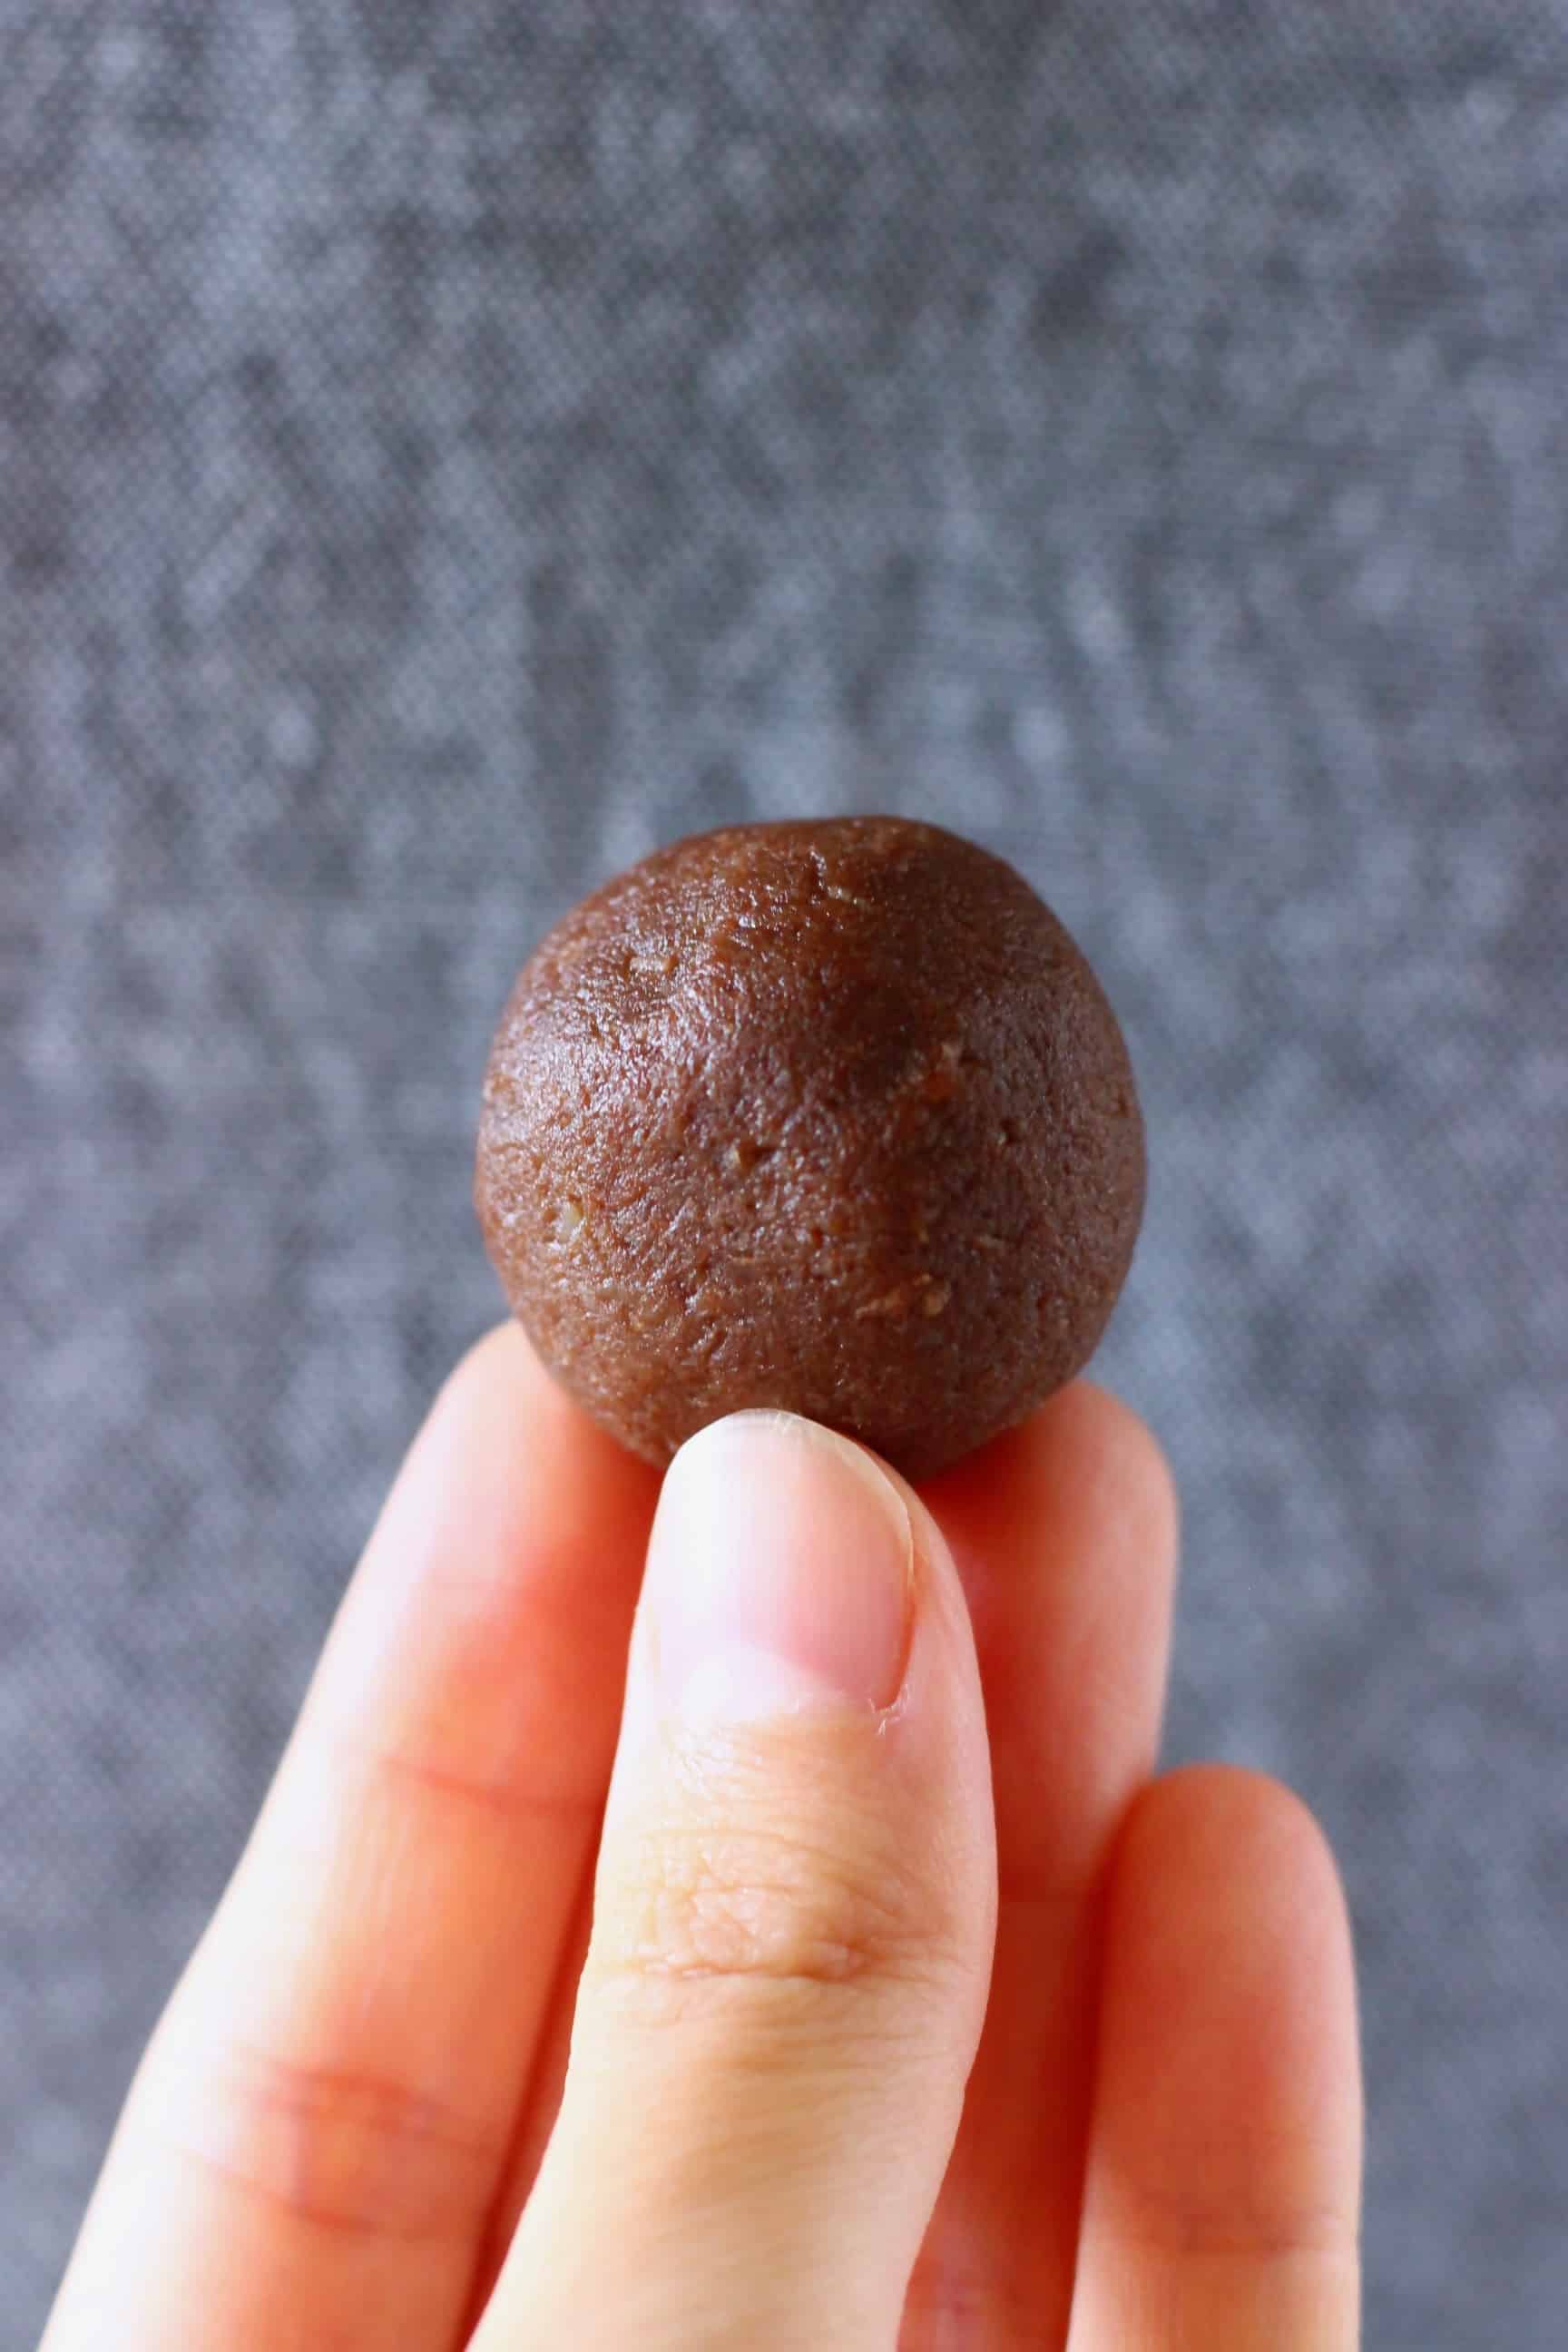 A round vegan protein ball being held up with a hand against a grey background